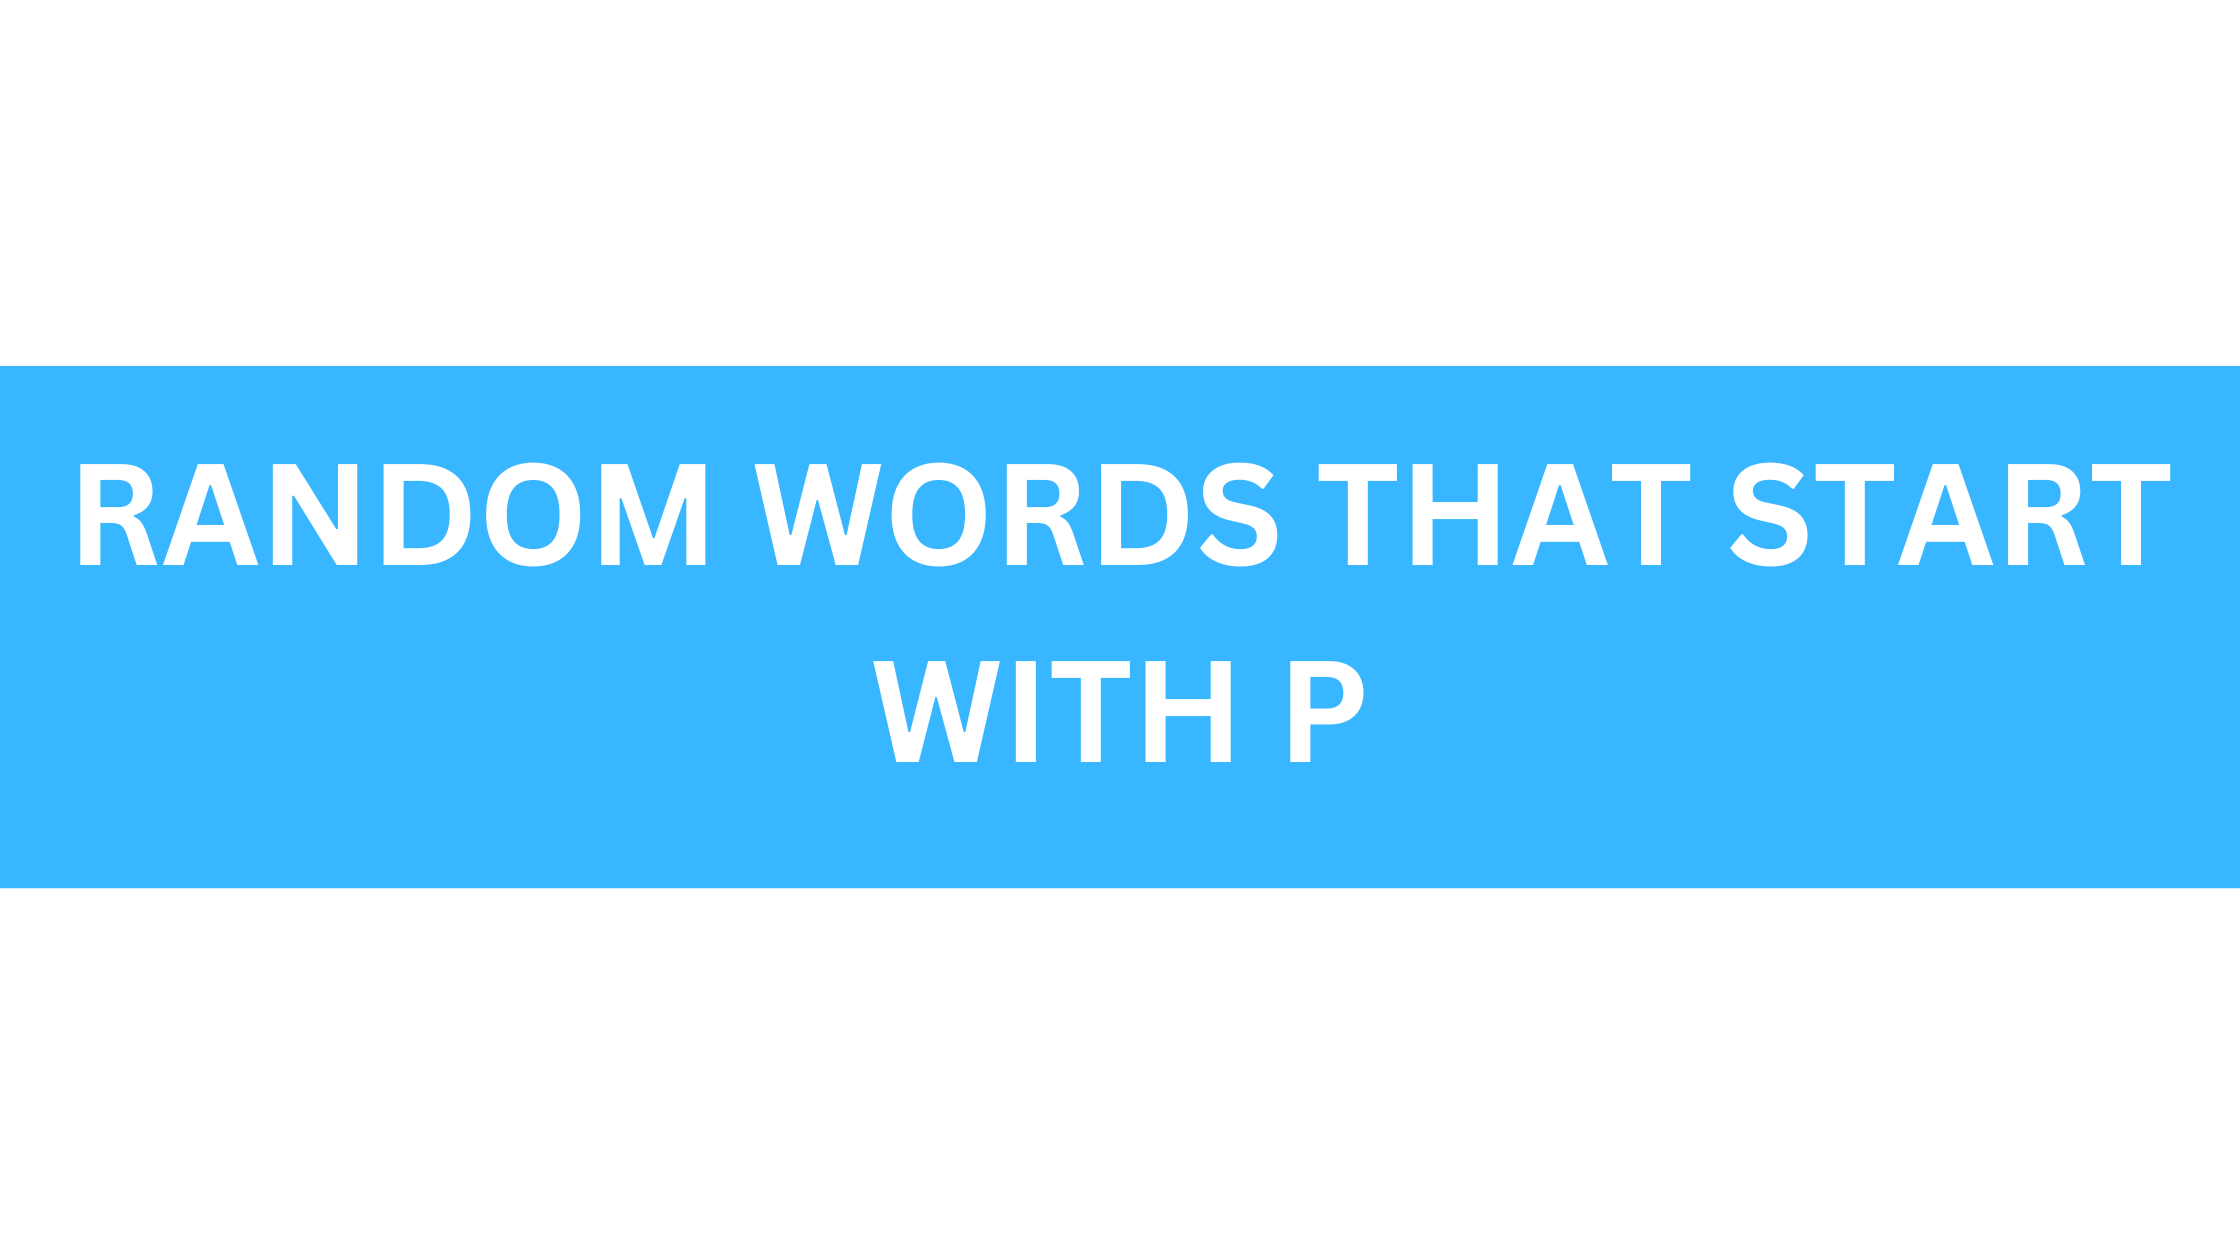 random words that start with p